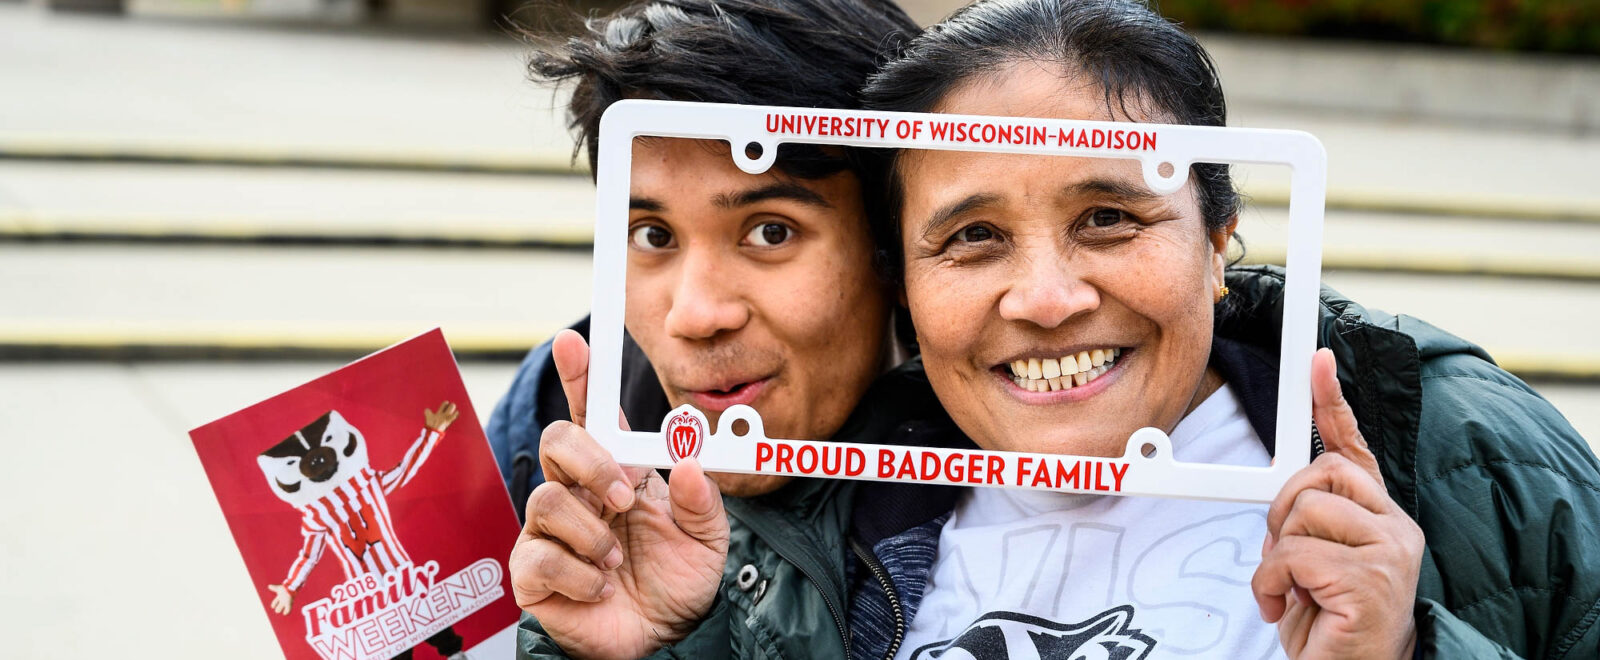 A college student and his mom pose laughing with faces close together framed by a University of Wisconsin license plate frame.